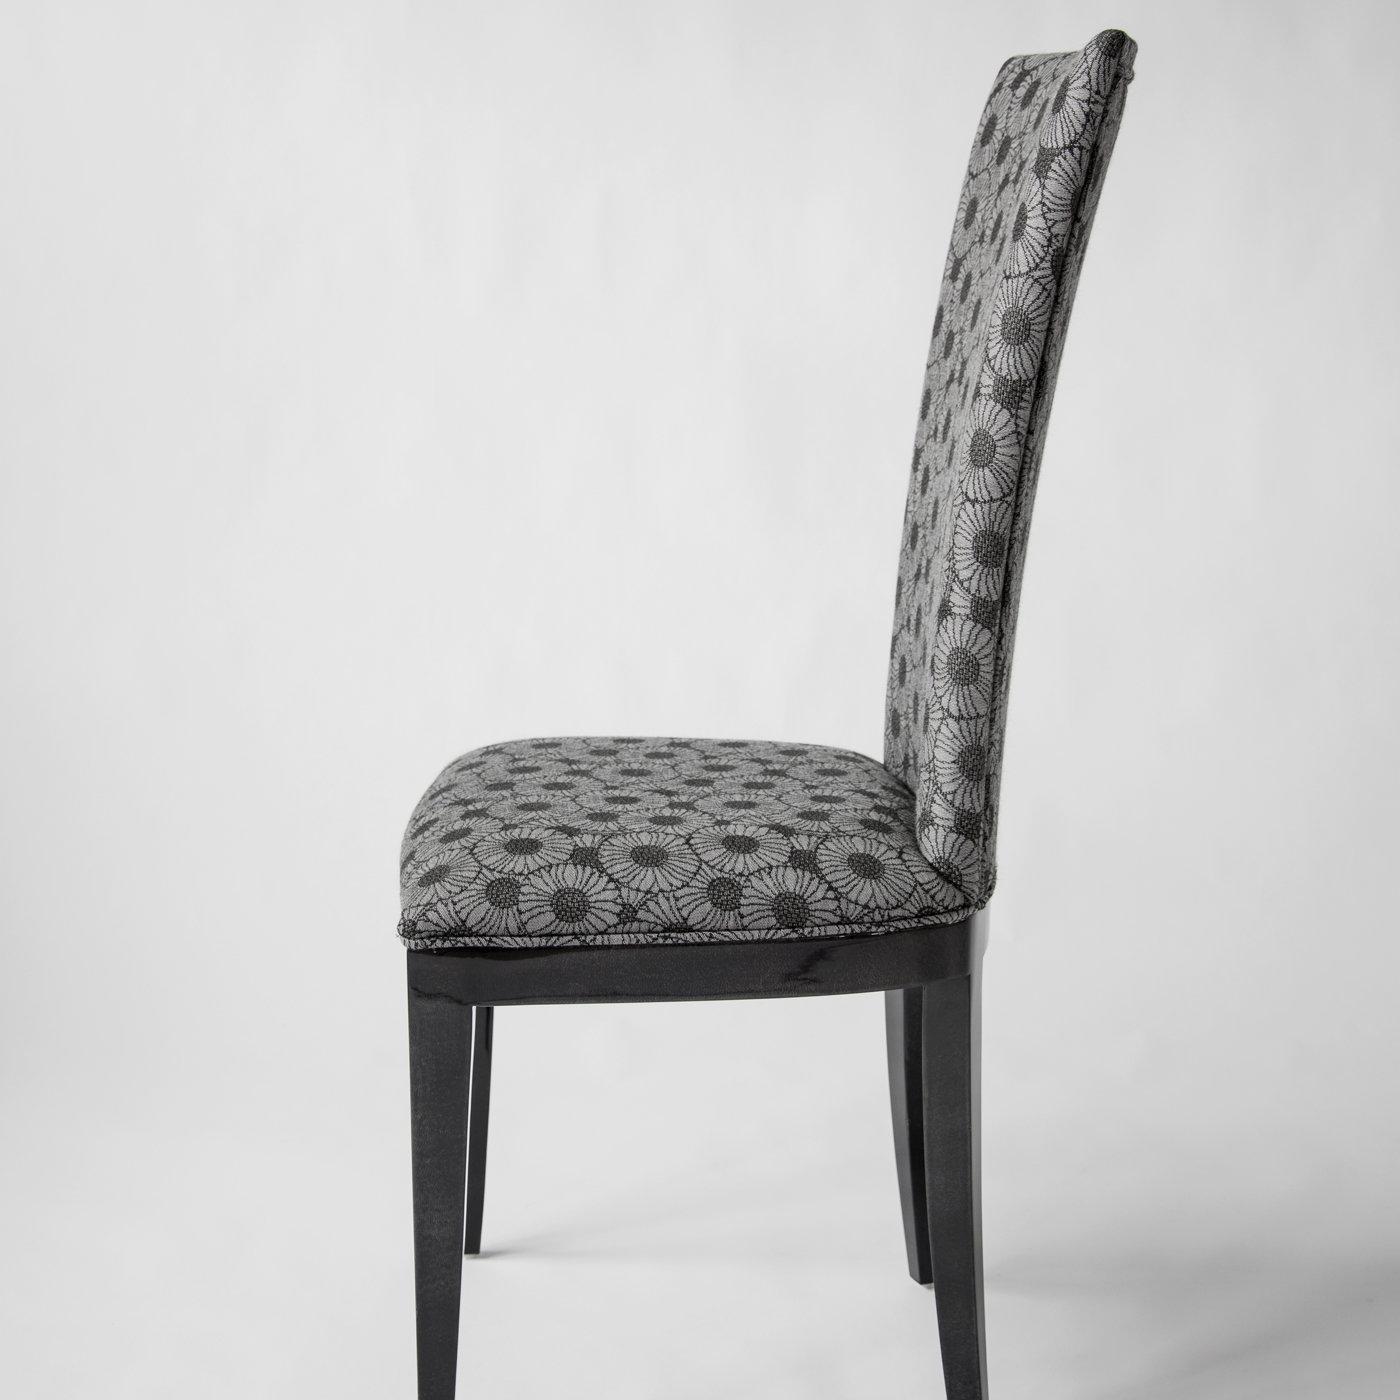 An exquisite example of designer seating, the Deco Chair has an elegant and sophisticated structure covered with gloss anthracite gray parchment and features a padded seat and back upholstered in vintage fabric. The captivating design will